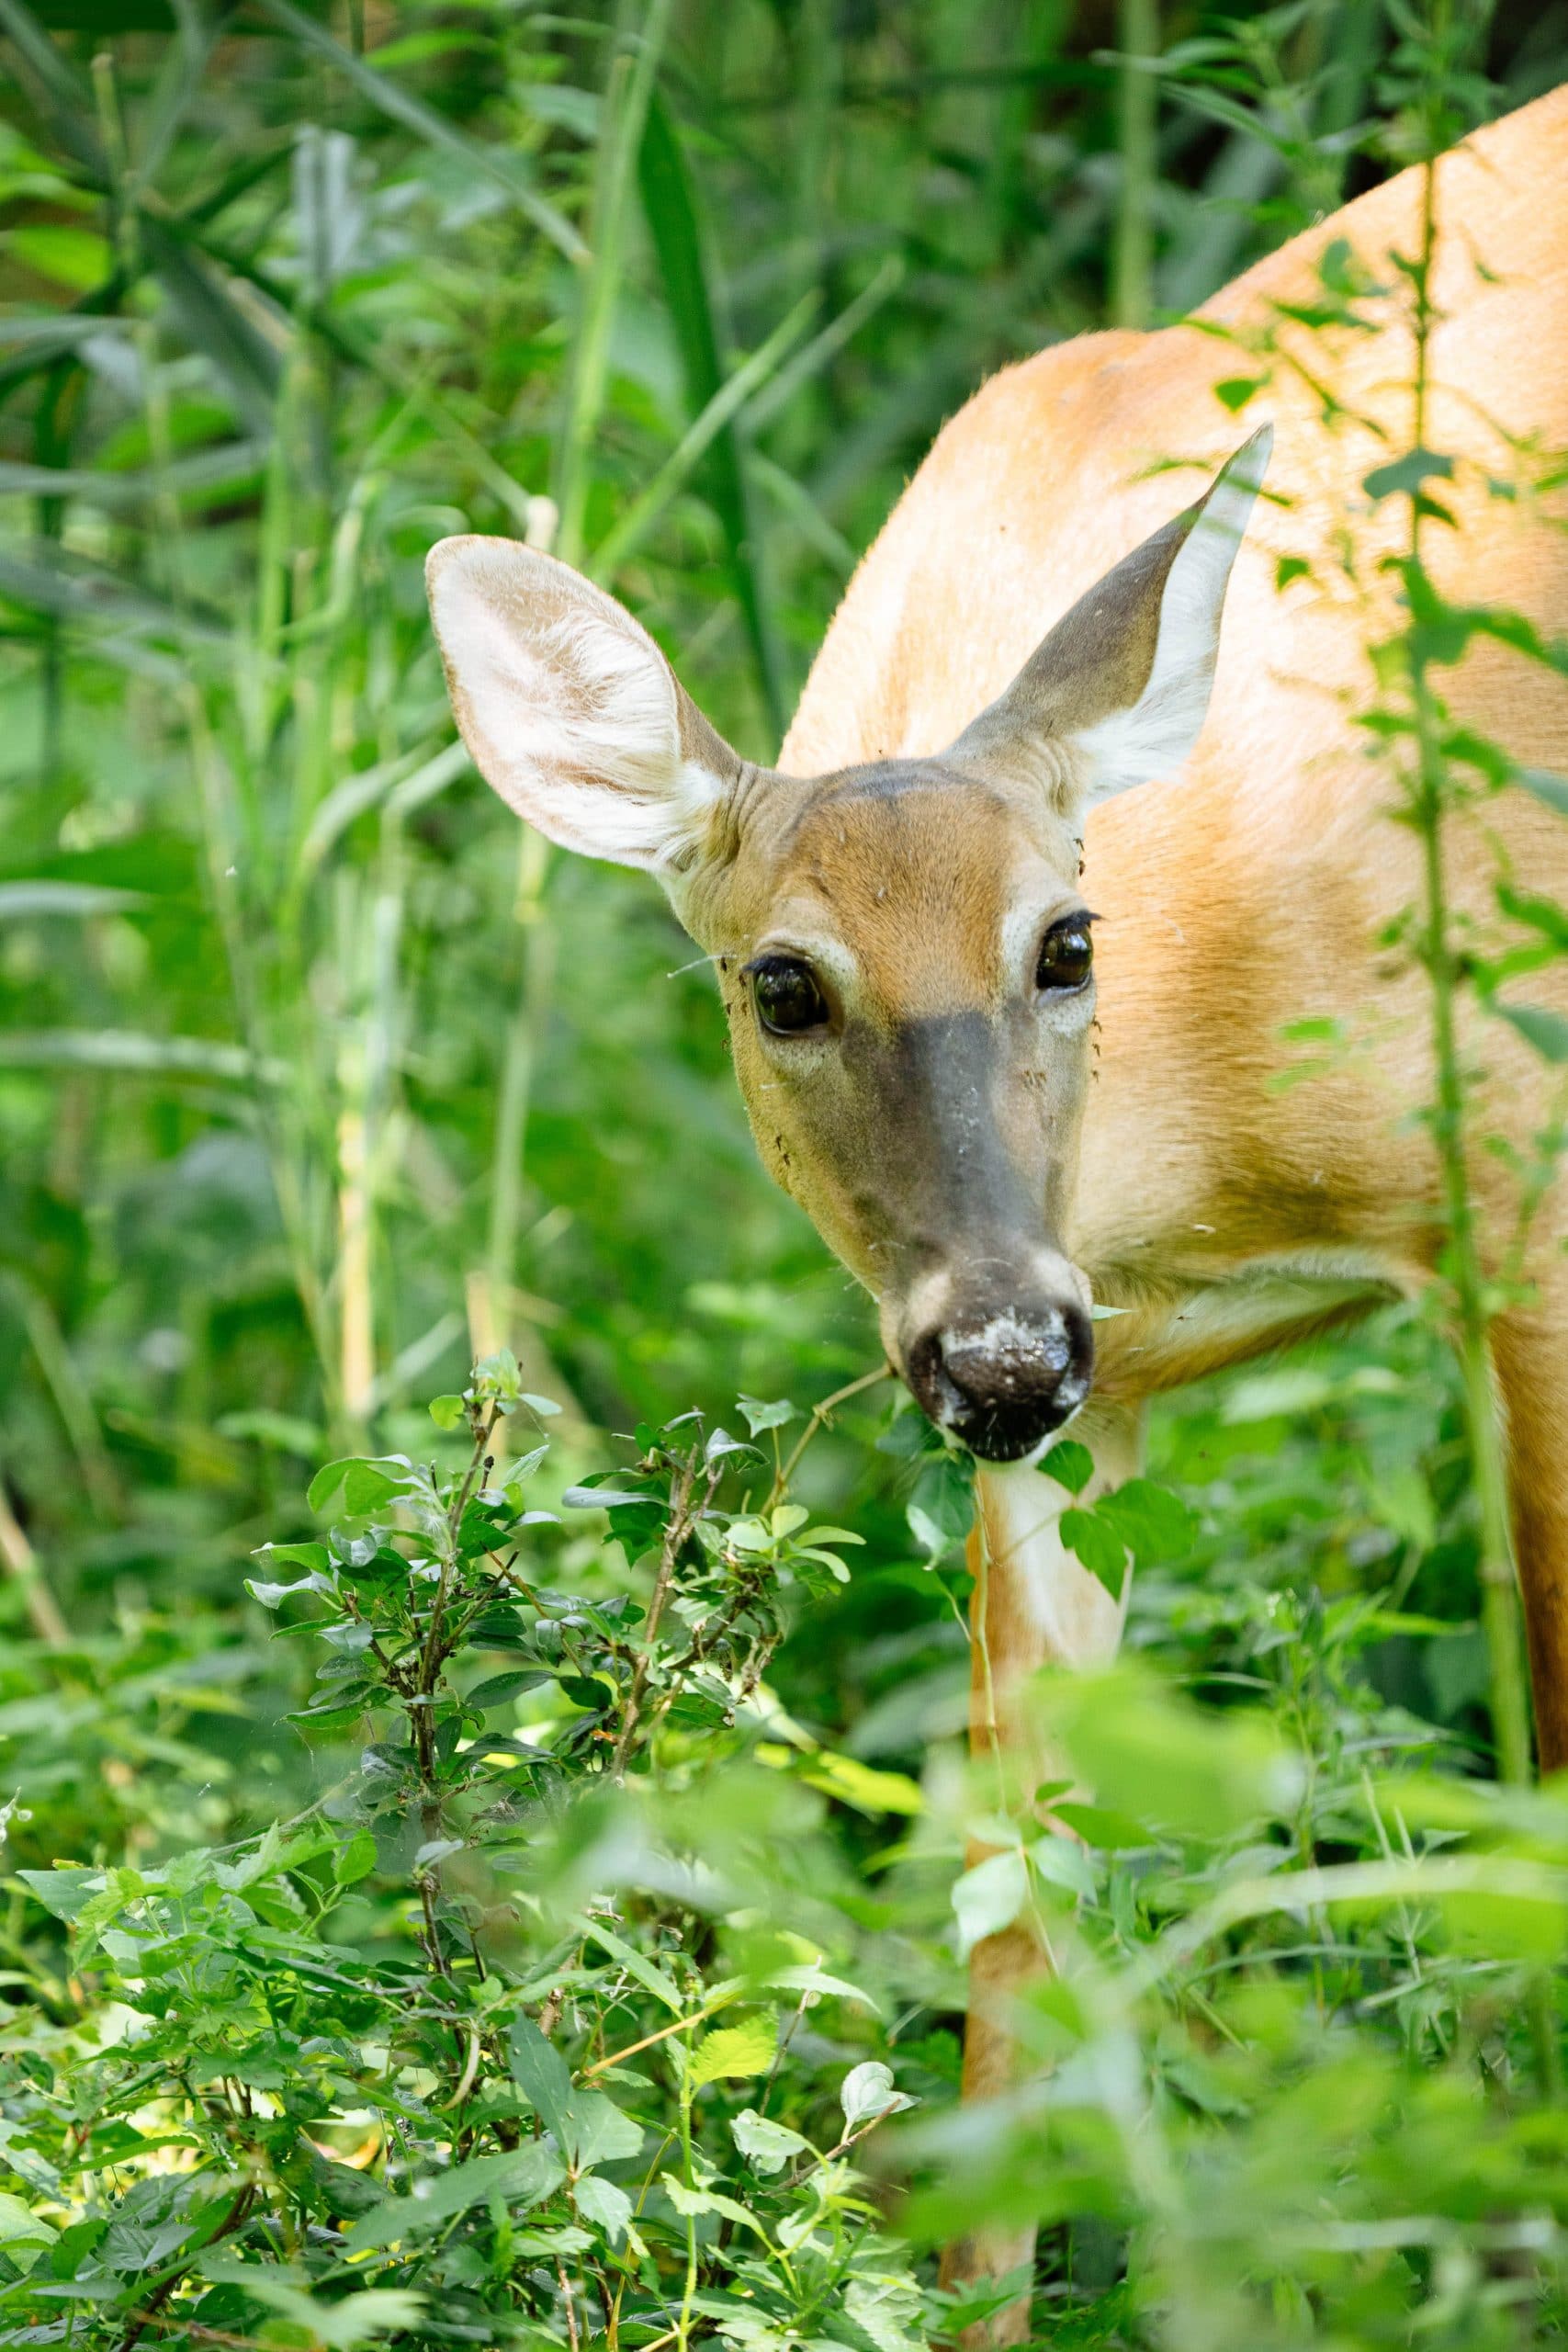 5 Super Effective and Humane Ways to Keep Deer Out of Your Garden